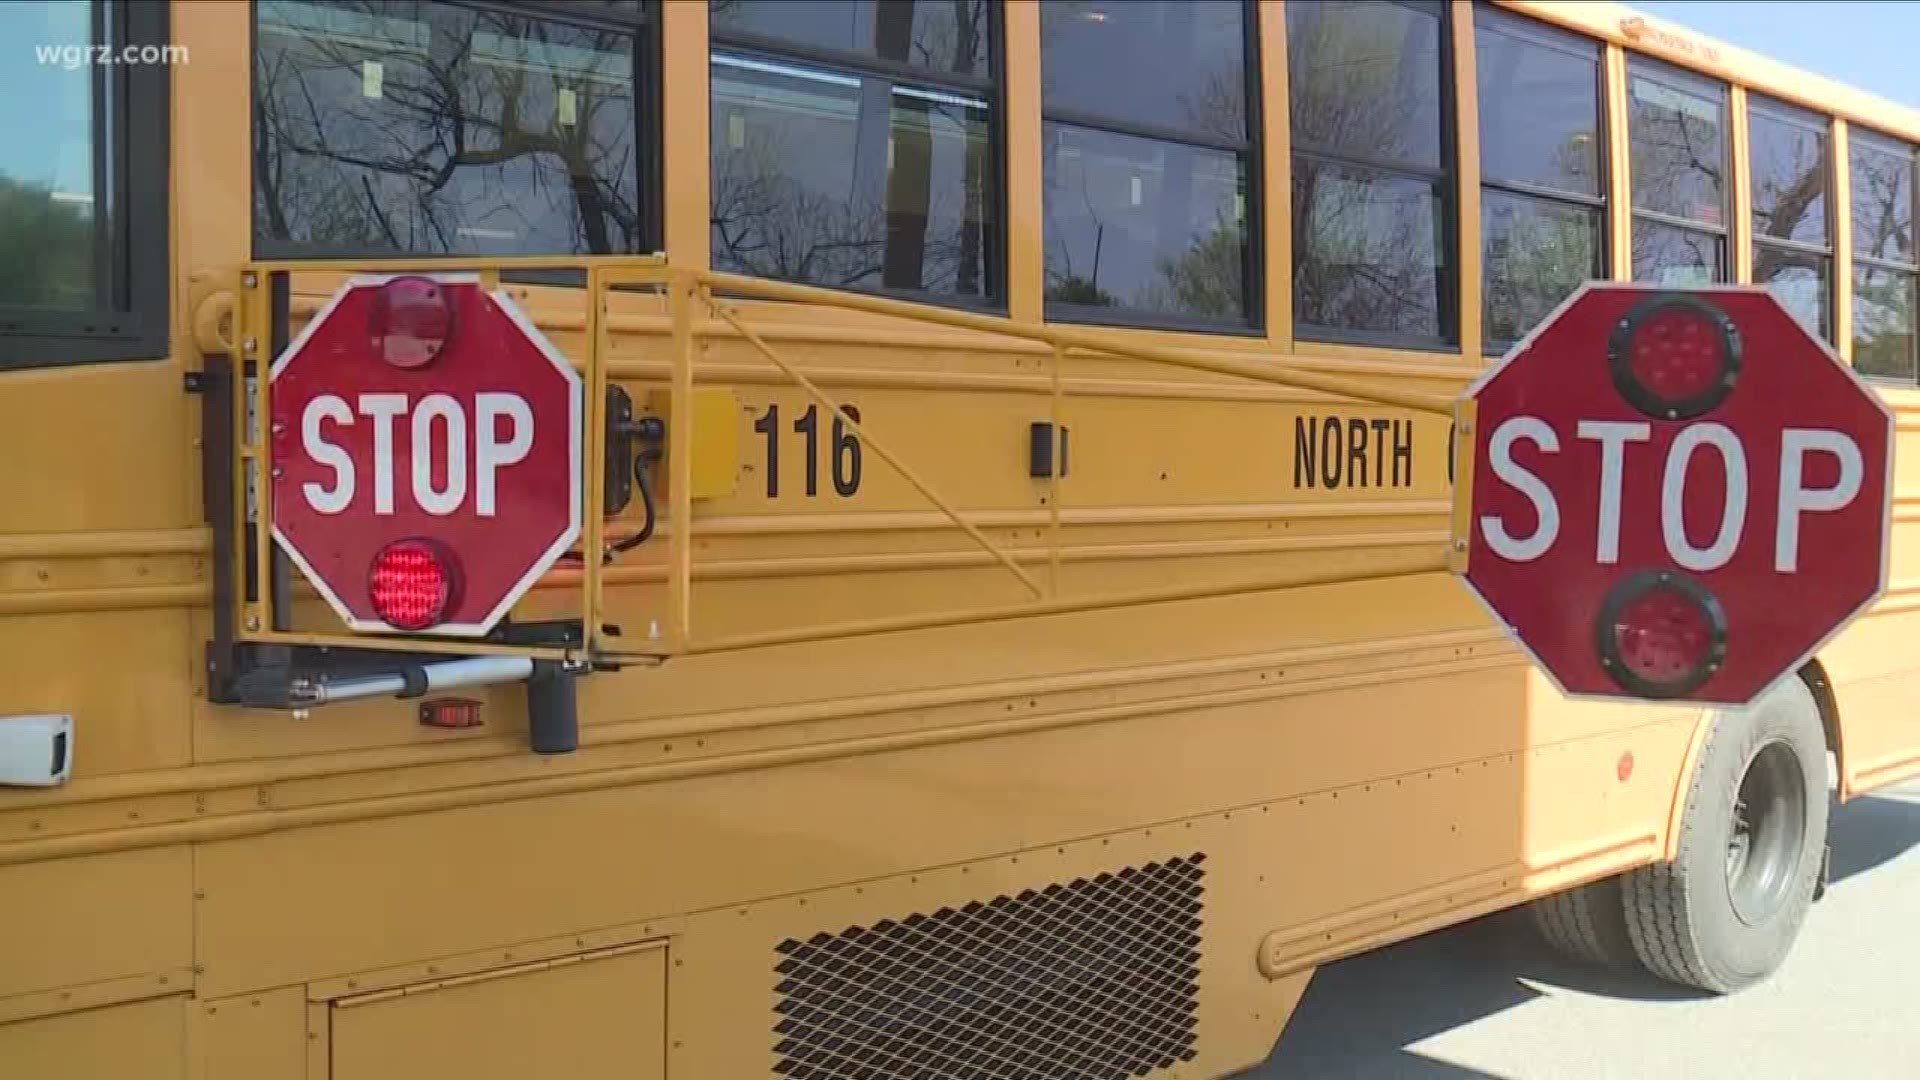 In observance of "Operation Safe Stop," Erie County Sheriff's Deputies will be out paying close attention to what drivers are doing around school buses Thursday.